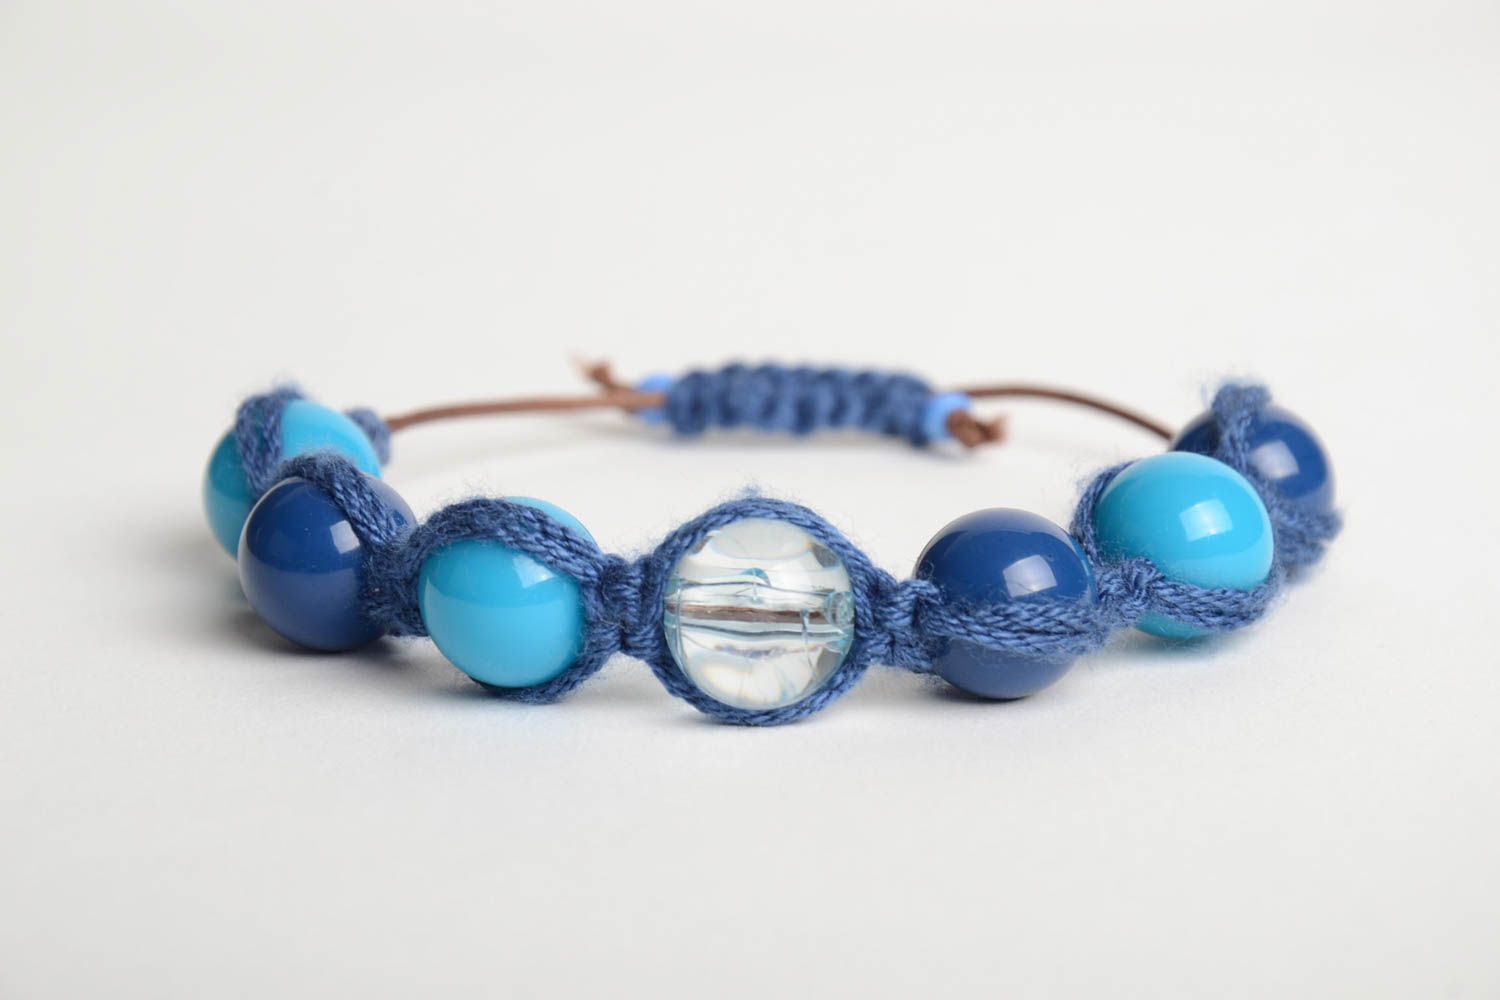 Handmade wrist bracelet crocheted of cord and plastic beads in blue color shades photo 4